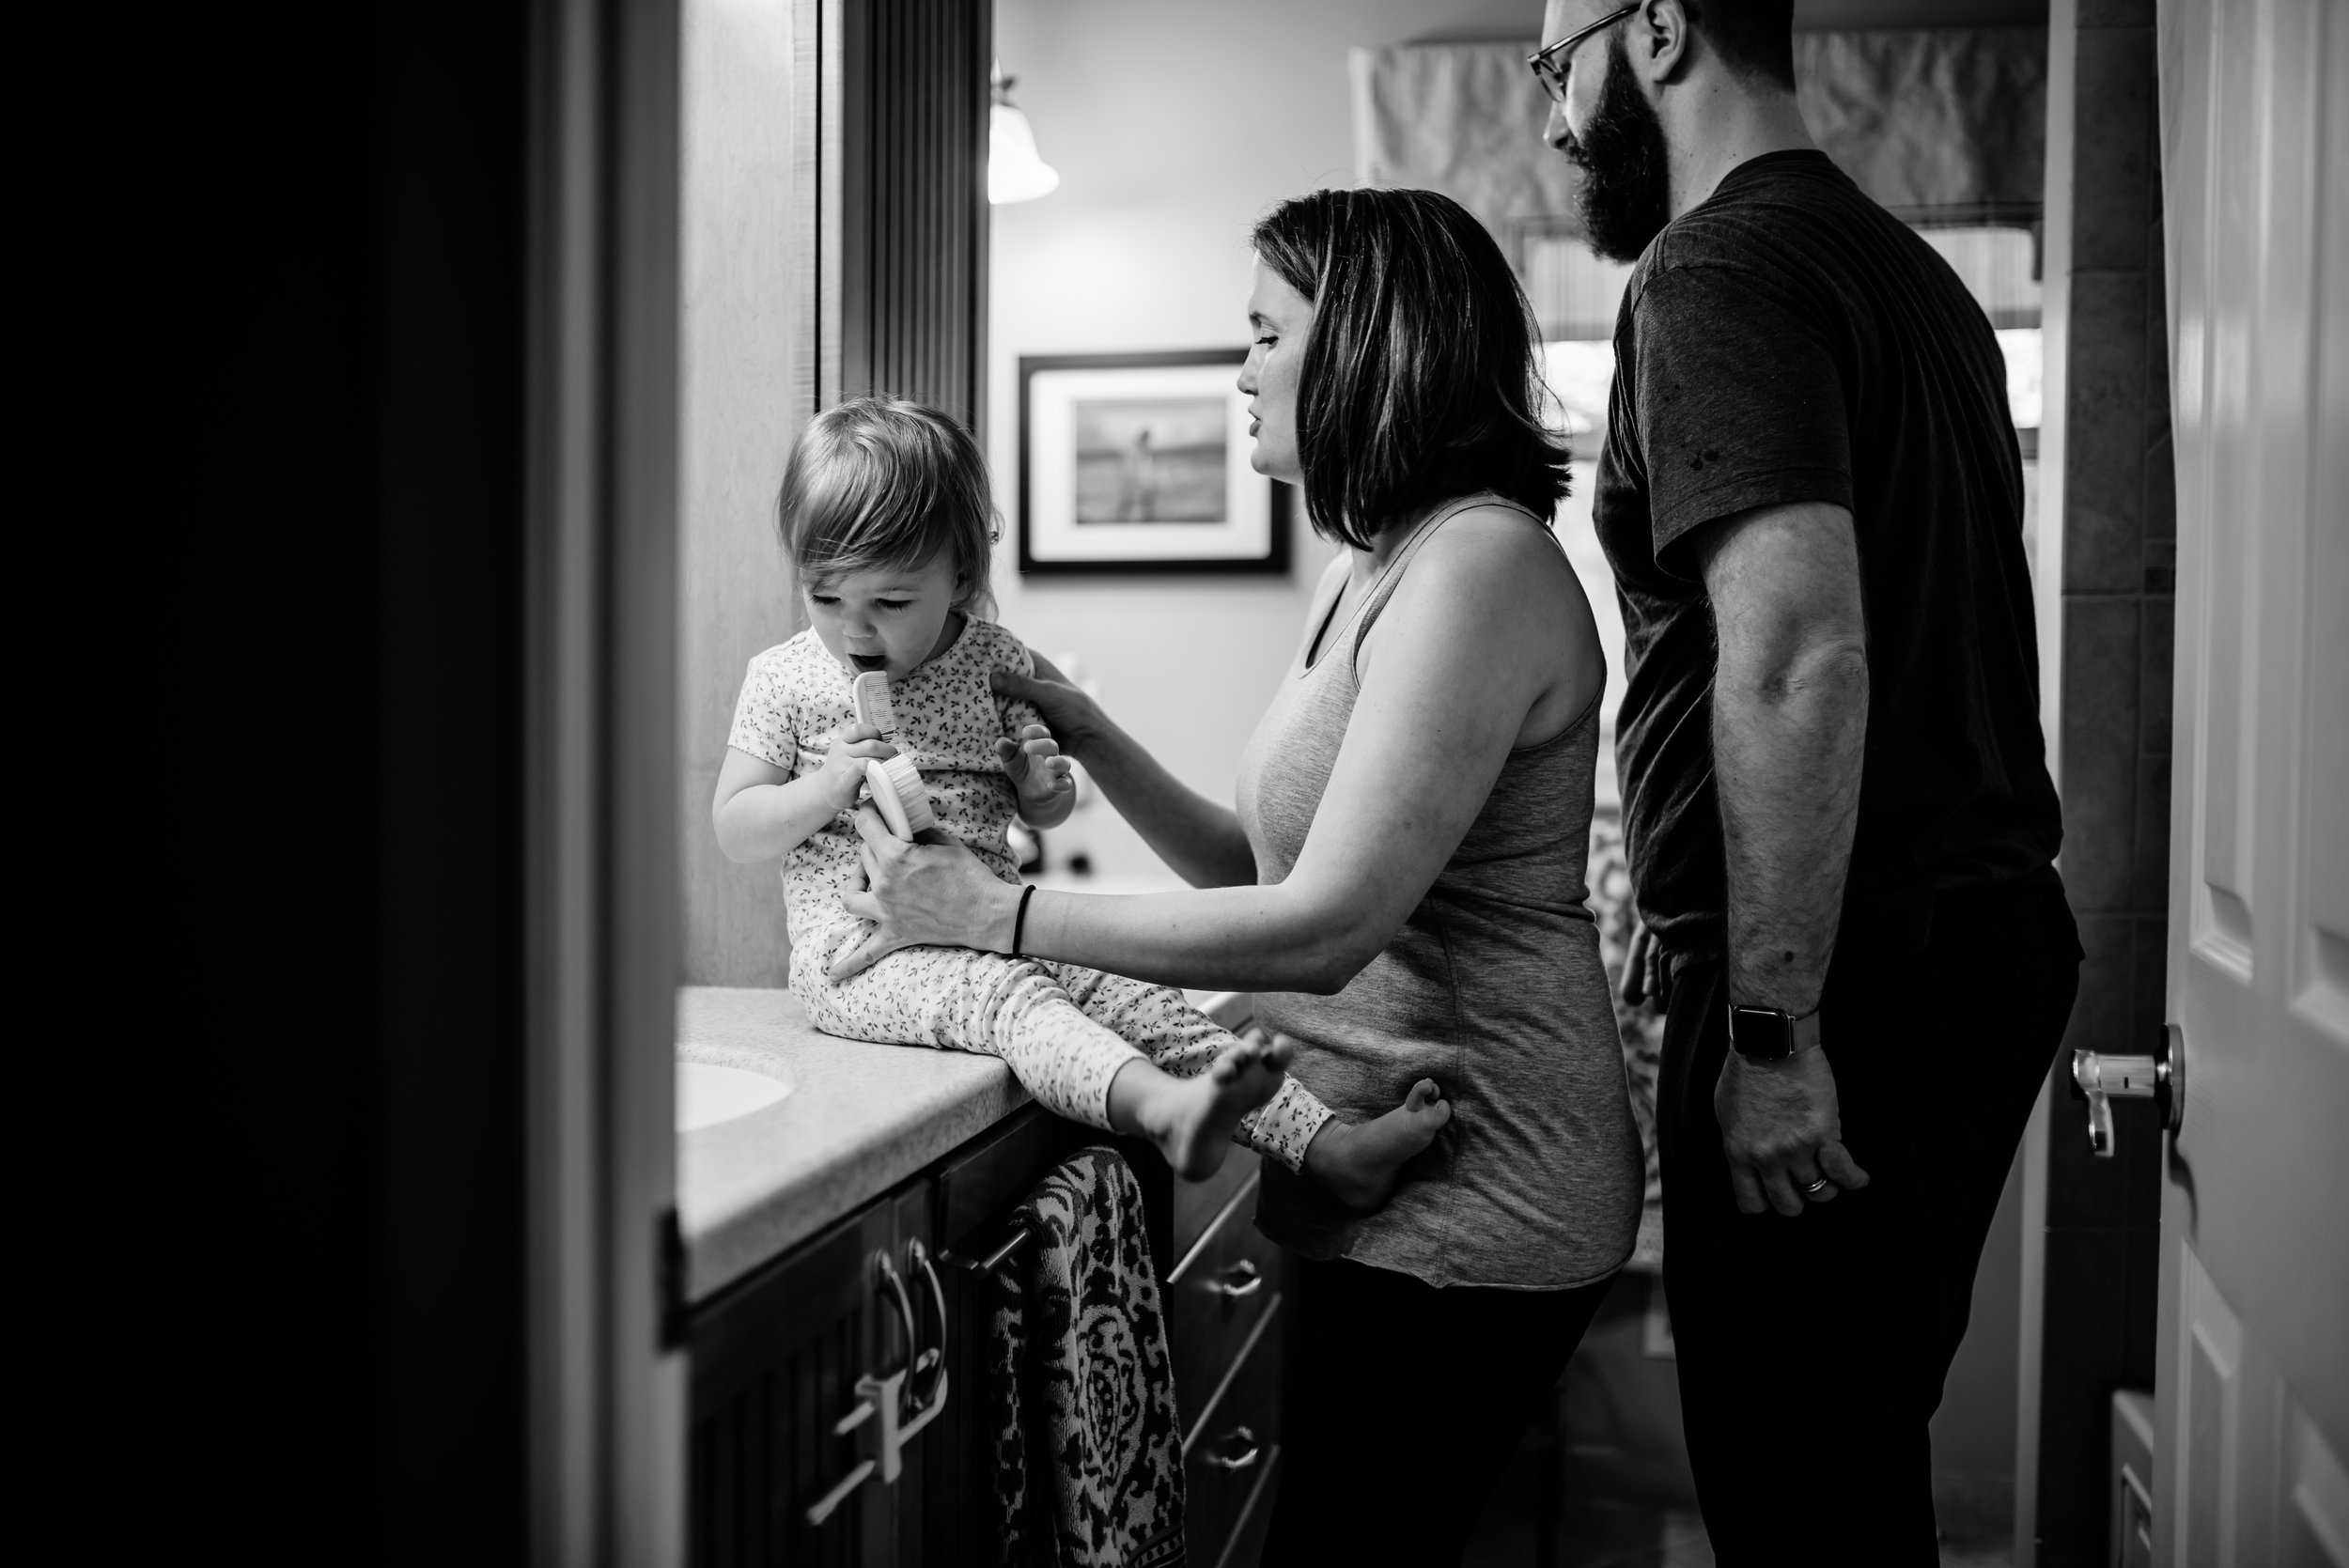 Mom and Dad get daughter ready for the day in bathroom